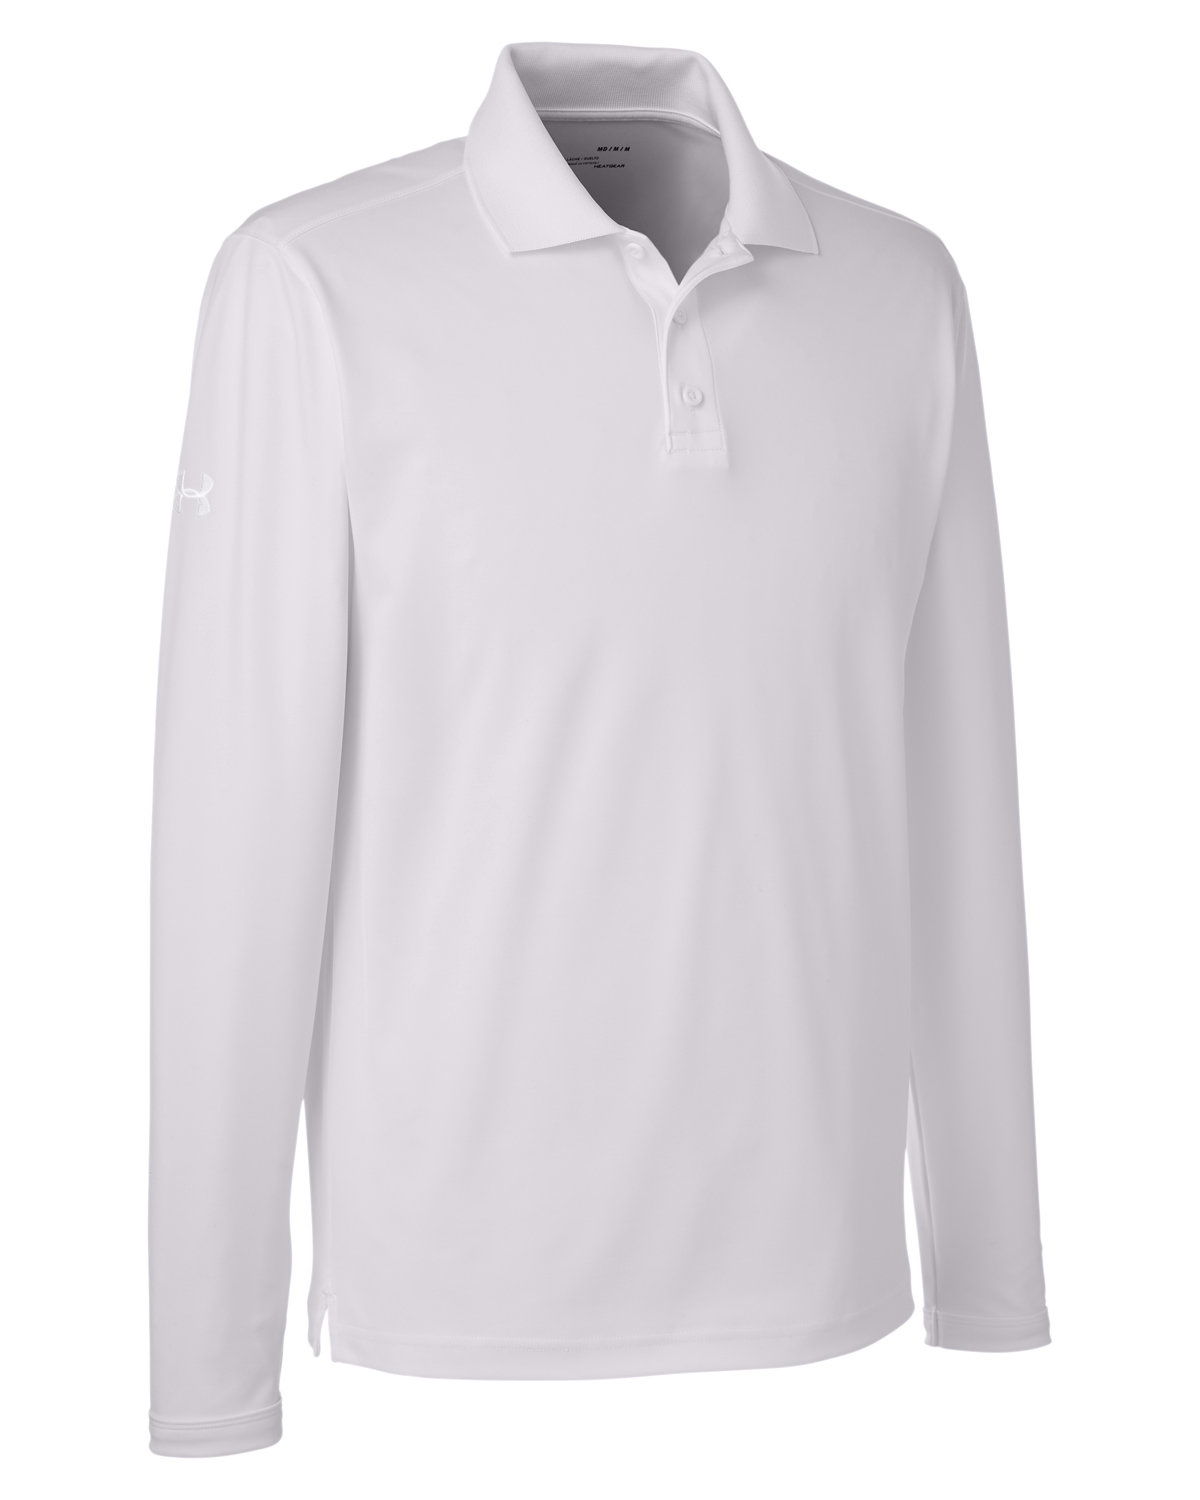 Under Armour Men's Corporate Long-Sleeve Performance Polo | alphabroder